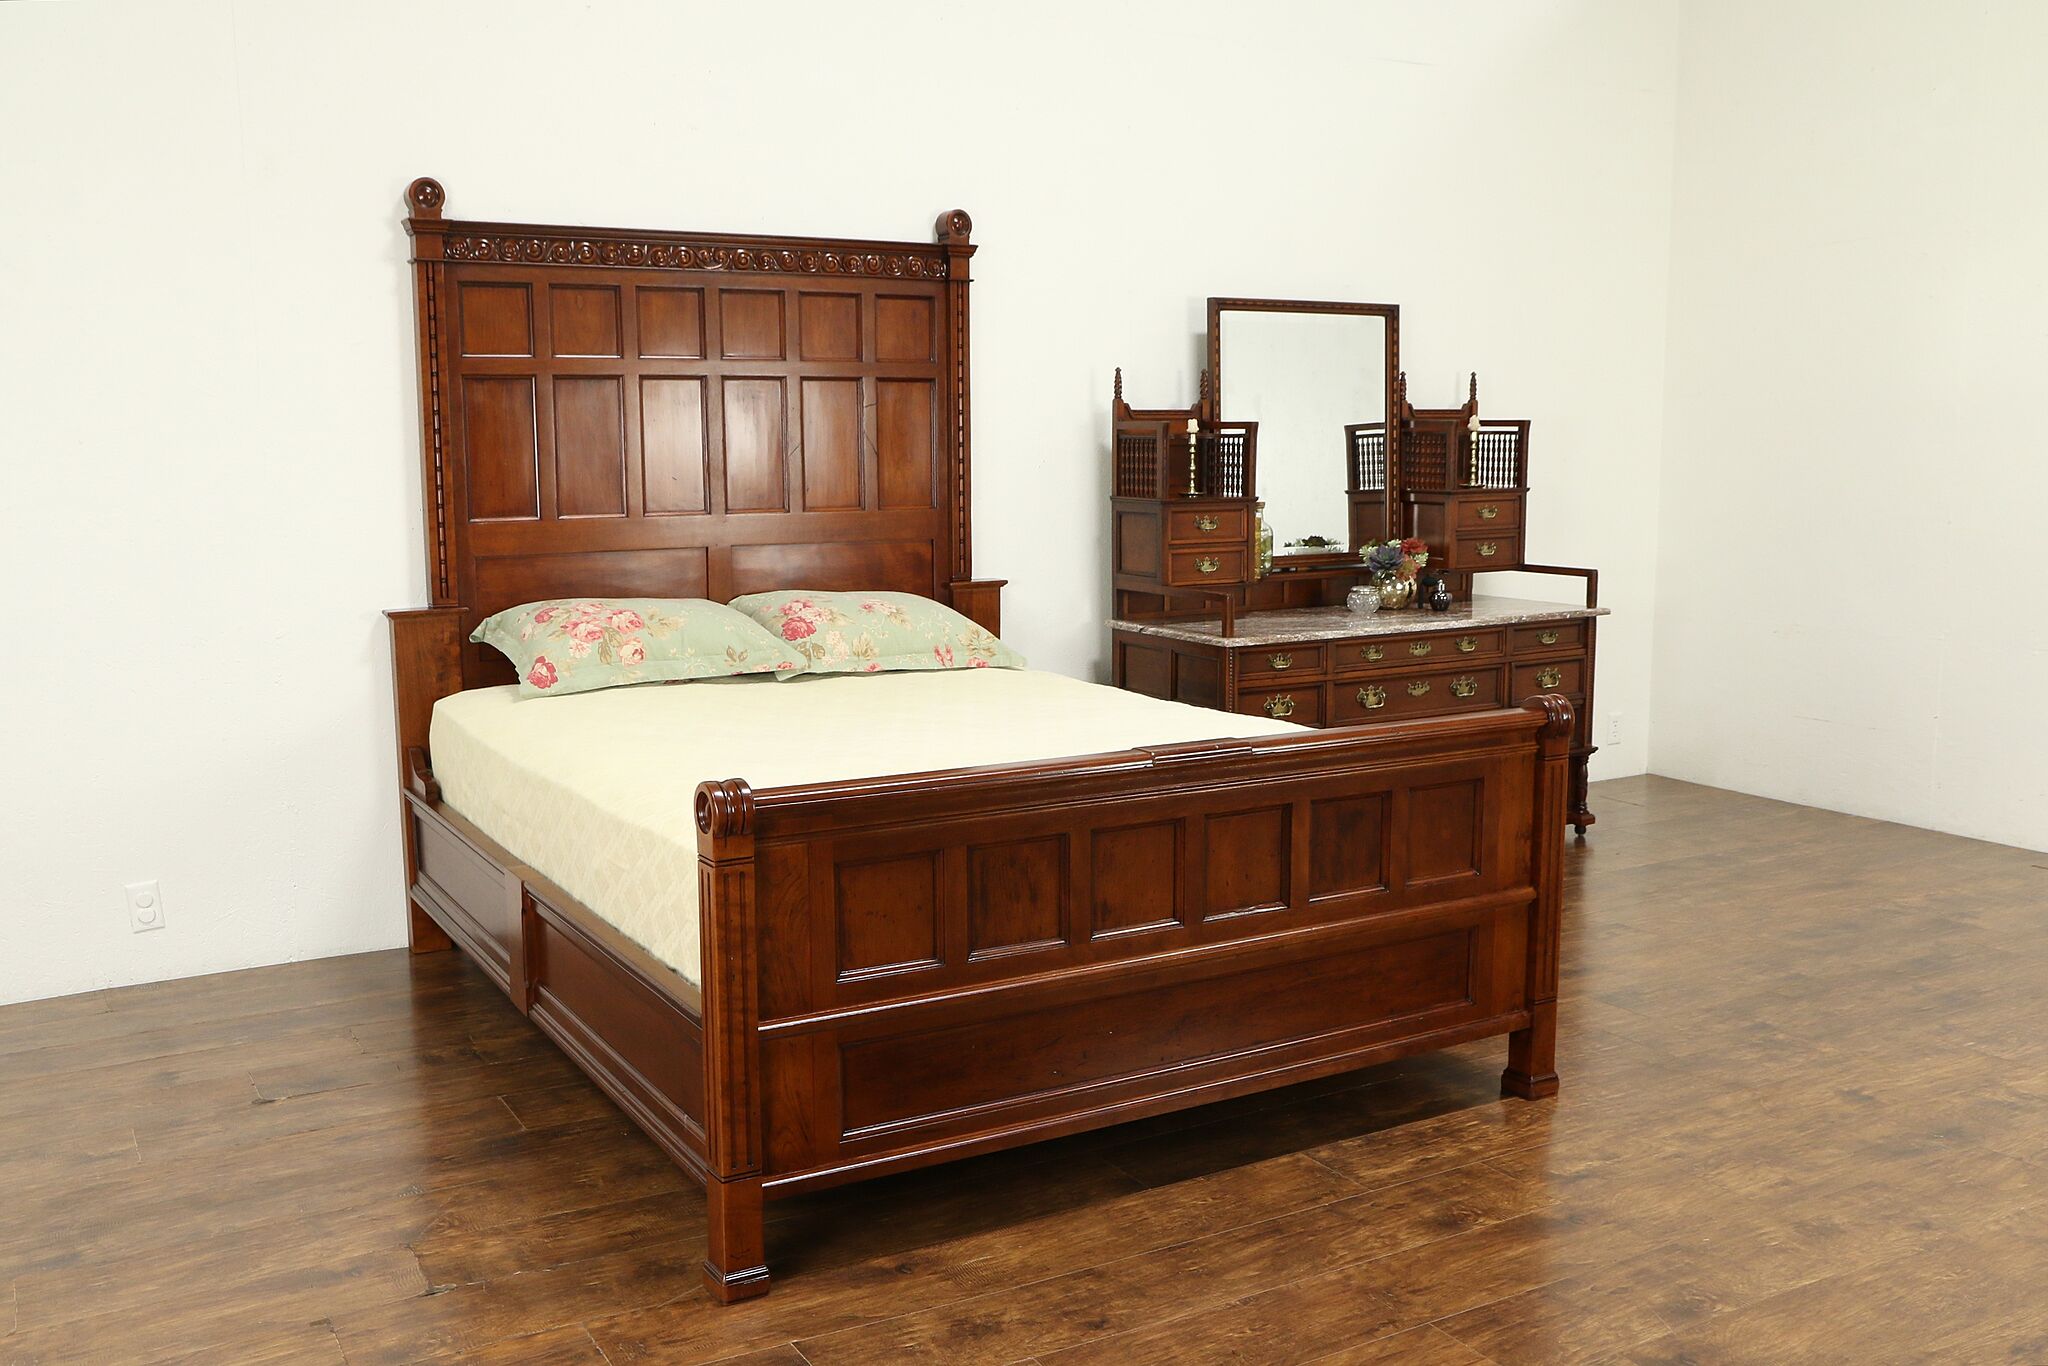 Carved Cherry Antique Bedroom Set Queen Size Bed Marble Top